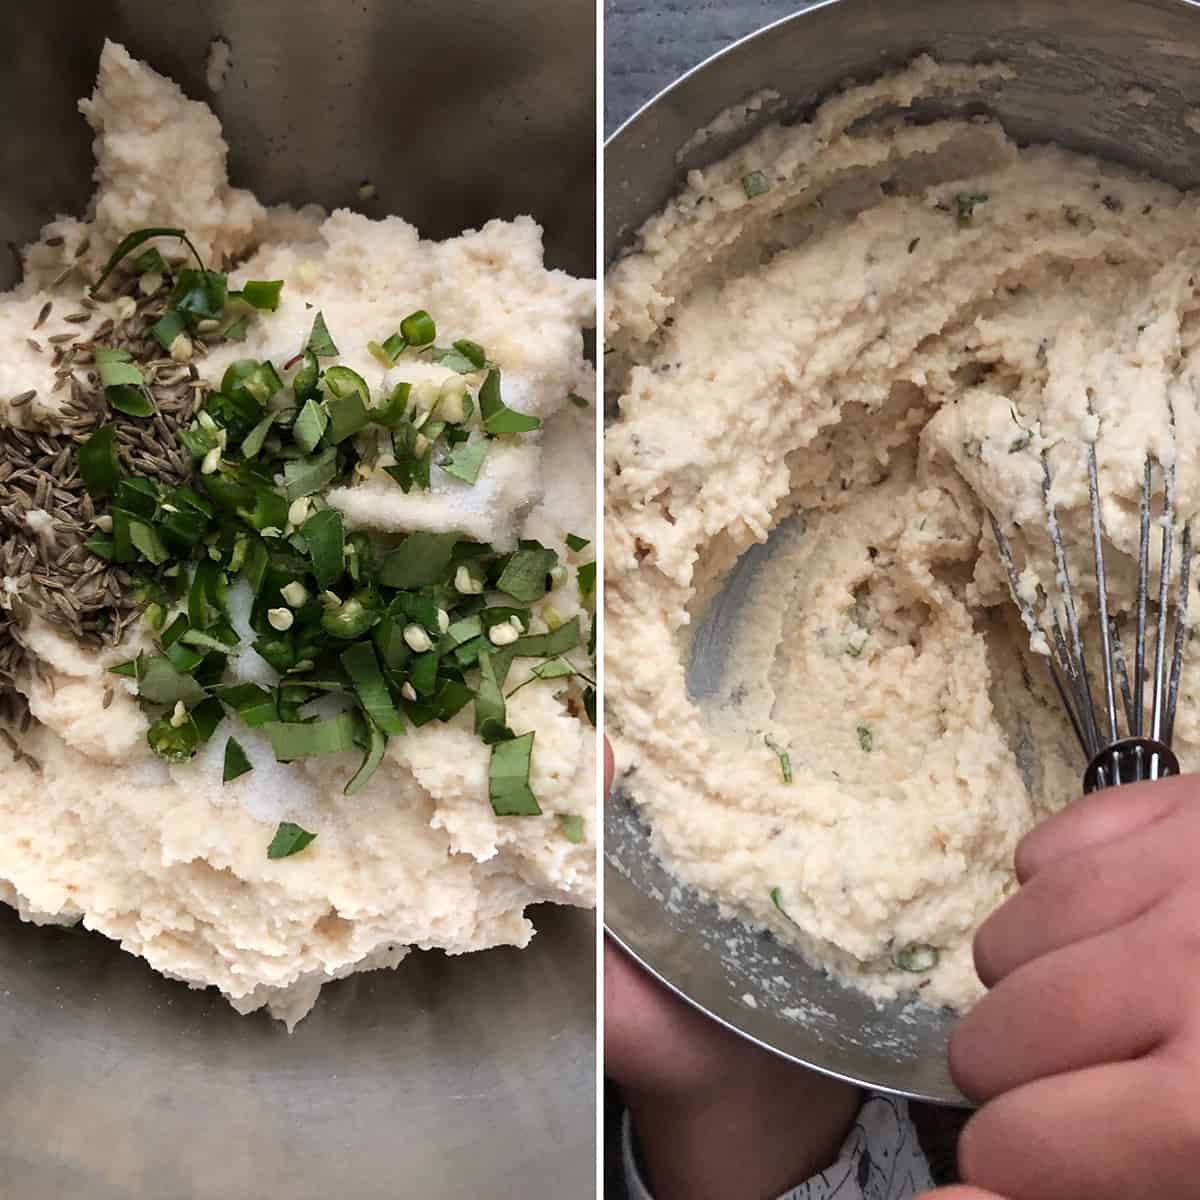 Ground batter with add-ins and hand whisking it